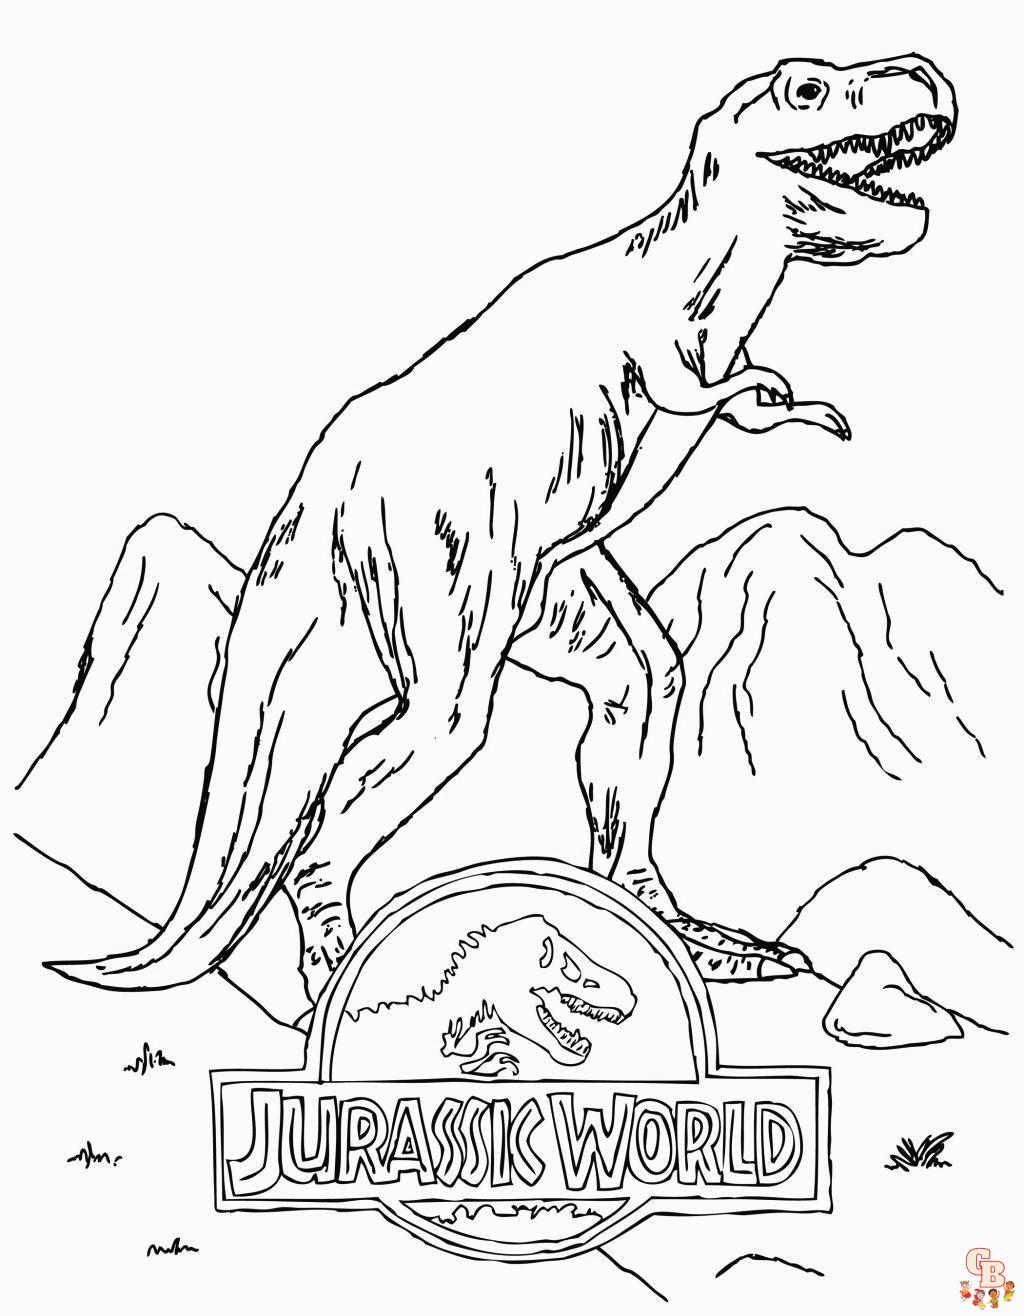 Jurassic Park coloring pages 7